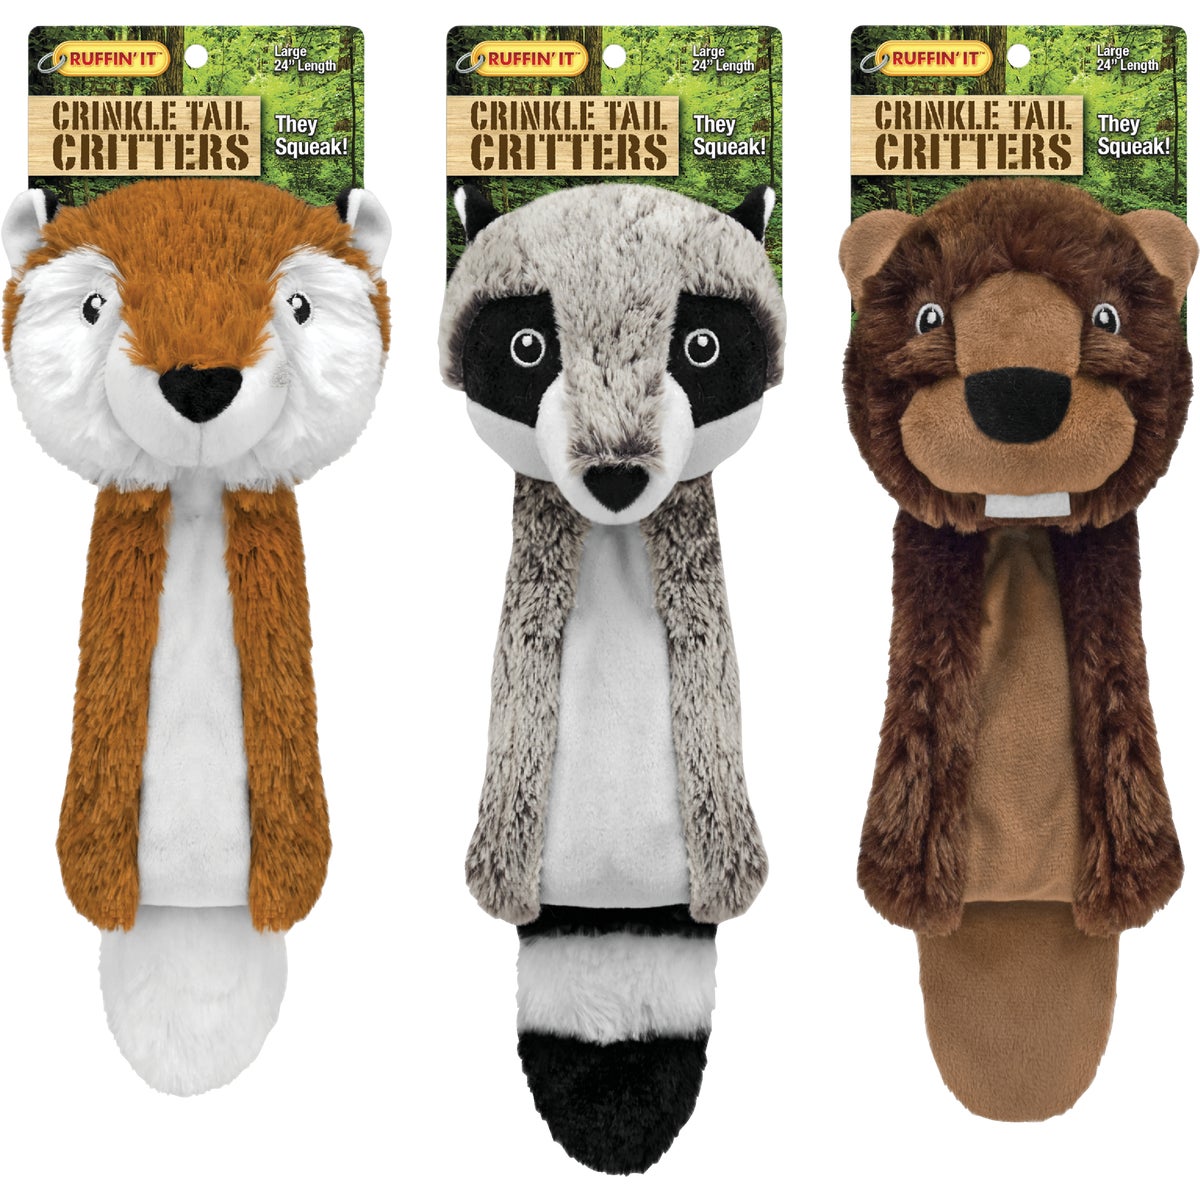 Ruffin' It Westminster Pet 16319 Westminster Pet Ruffin' it Crinkle Tail Critters 24 In. Squeaky Fox Dog Toy 16319